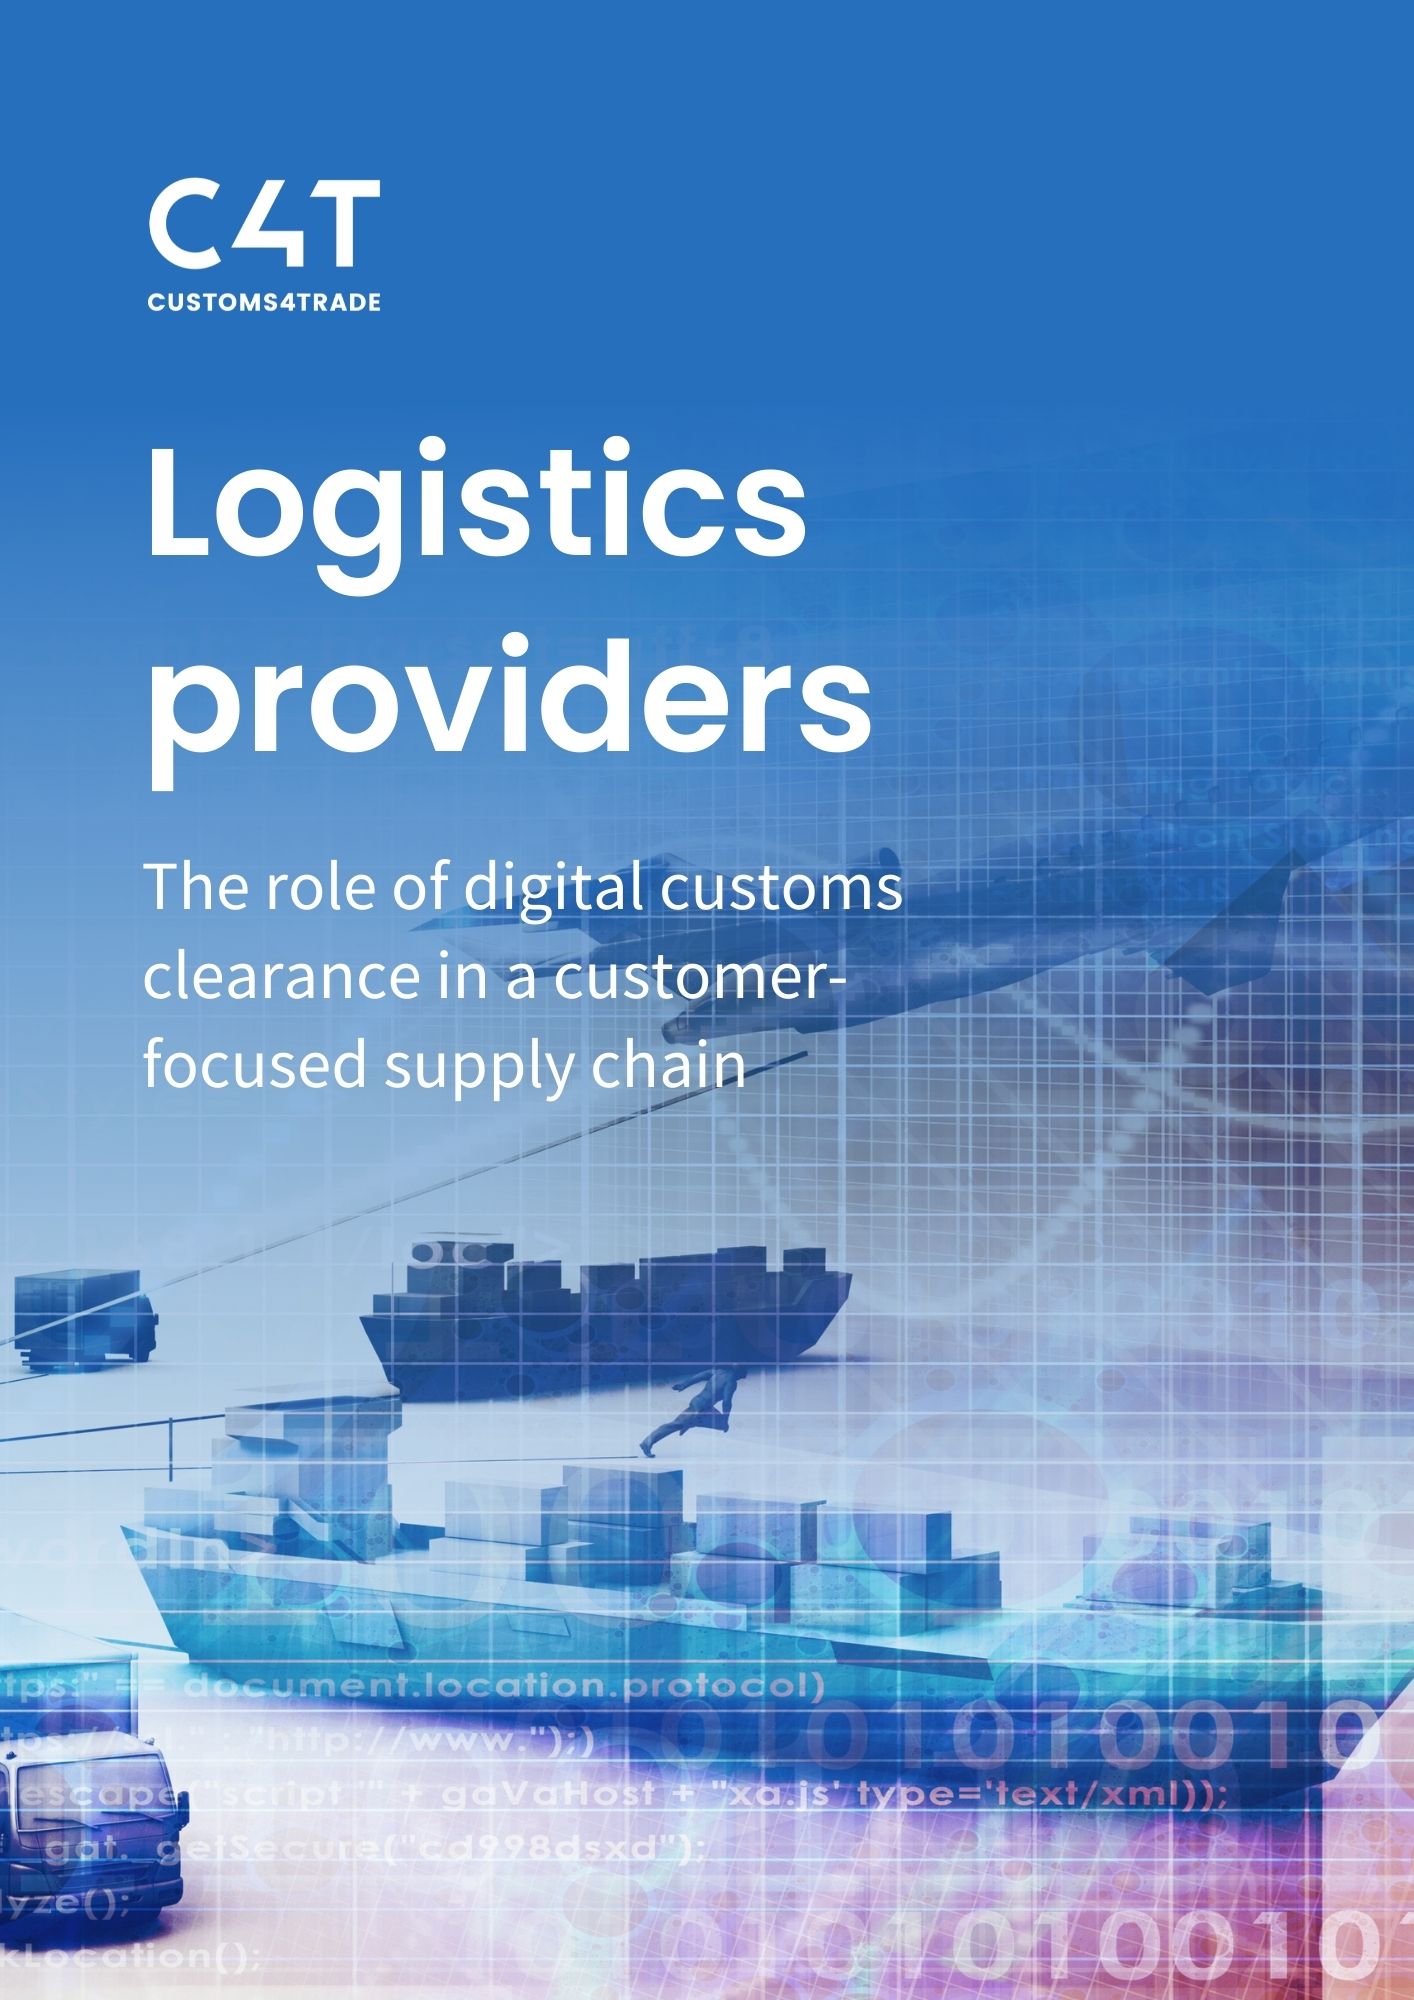 The role of digital customs clearance in a customer-focused supply chain